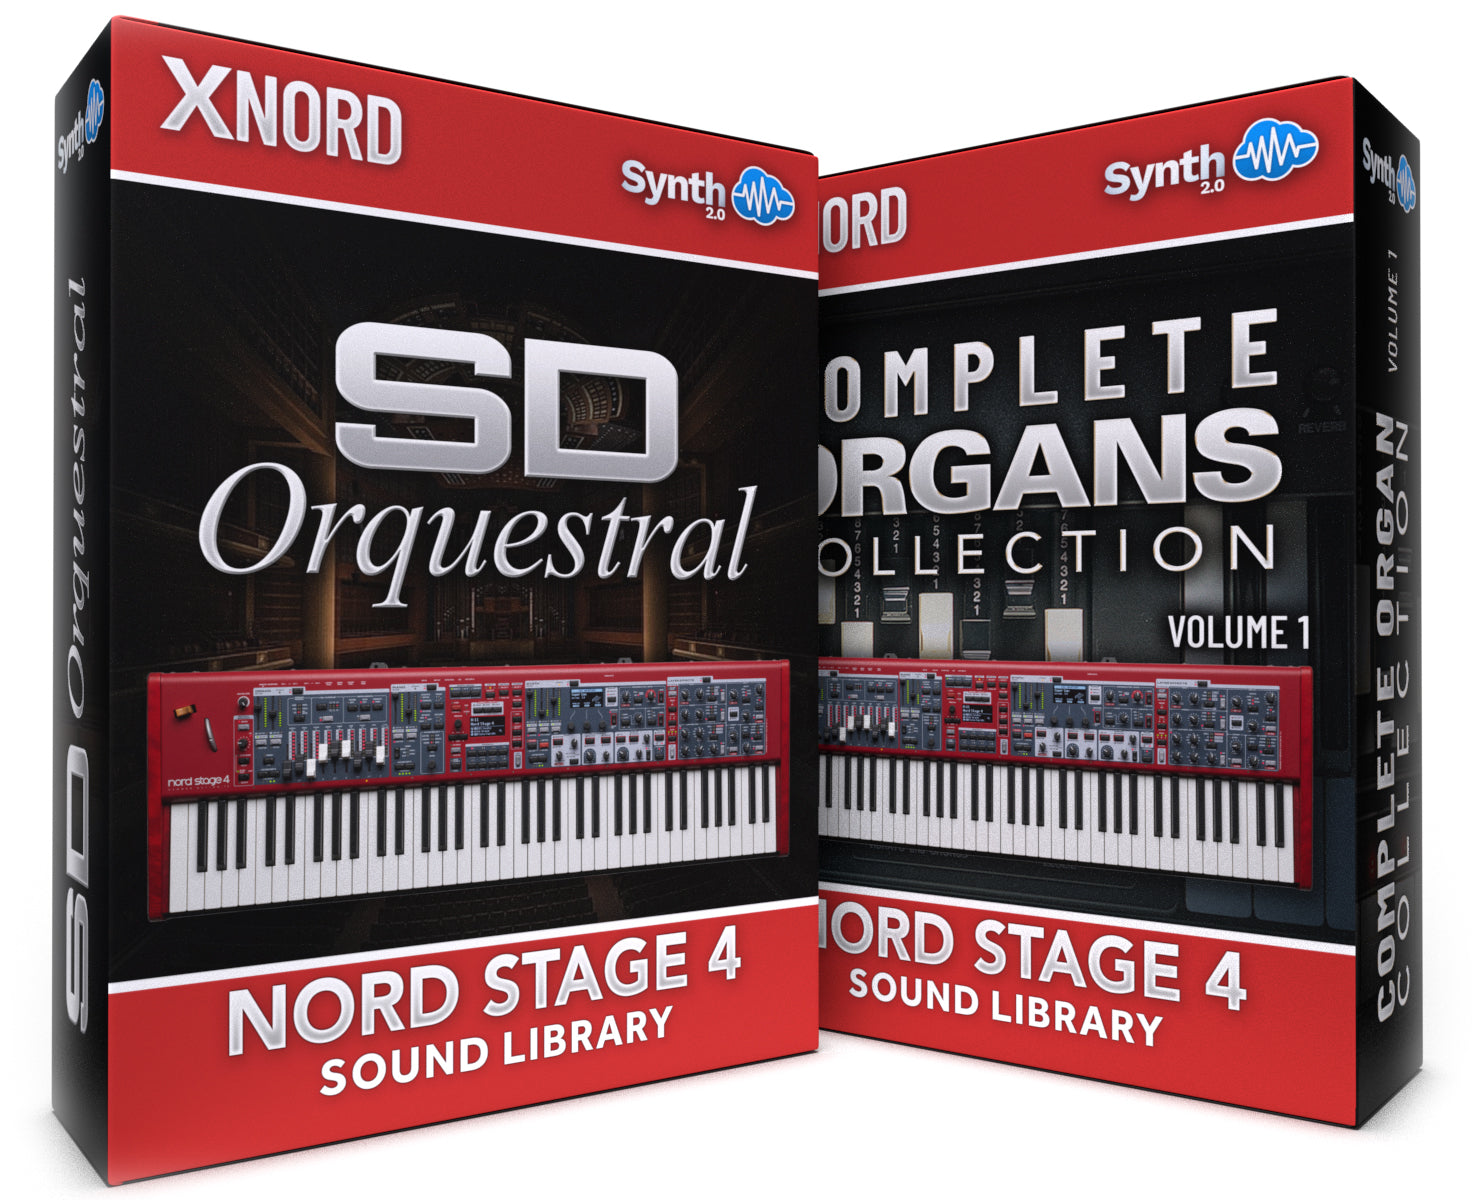 SCL413 - ( Bundle ) - SD Orquestral + Complete Organs Collection V1 - Nord Stage 4